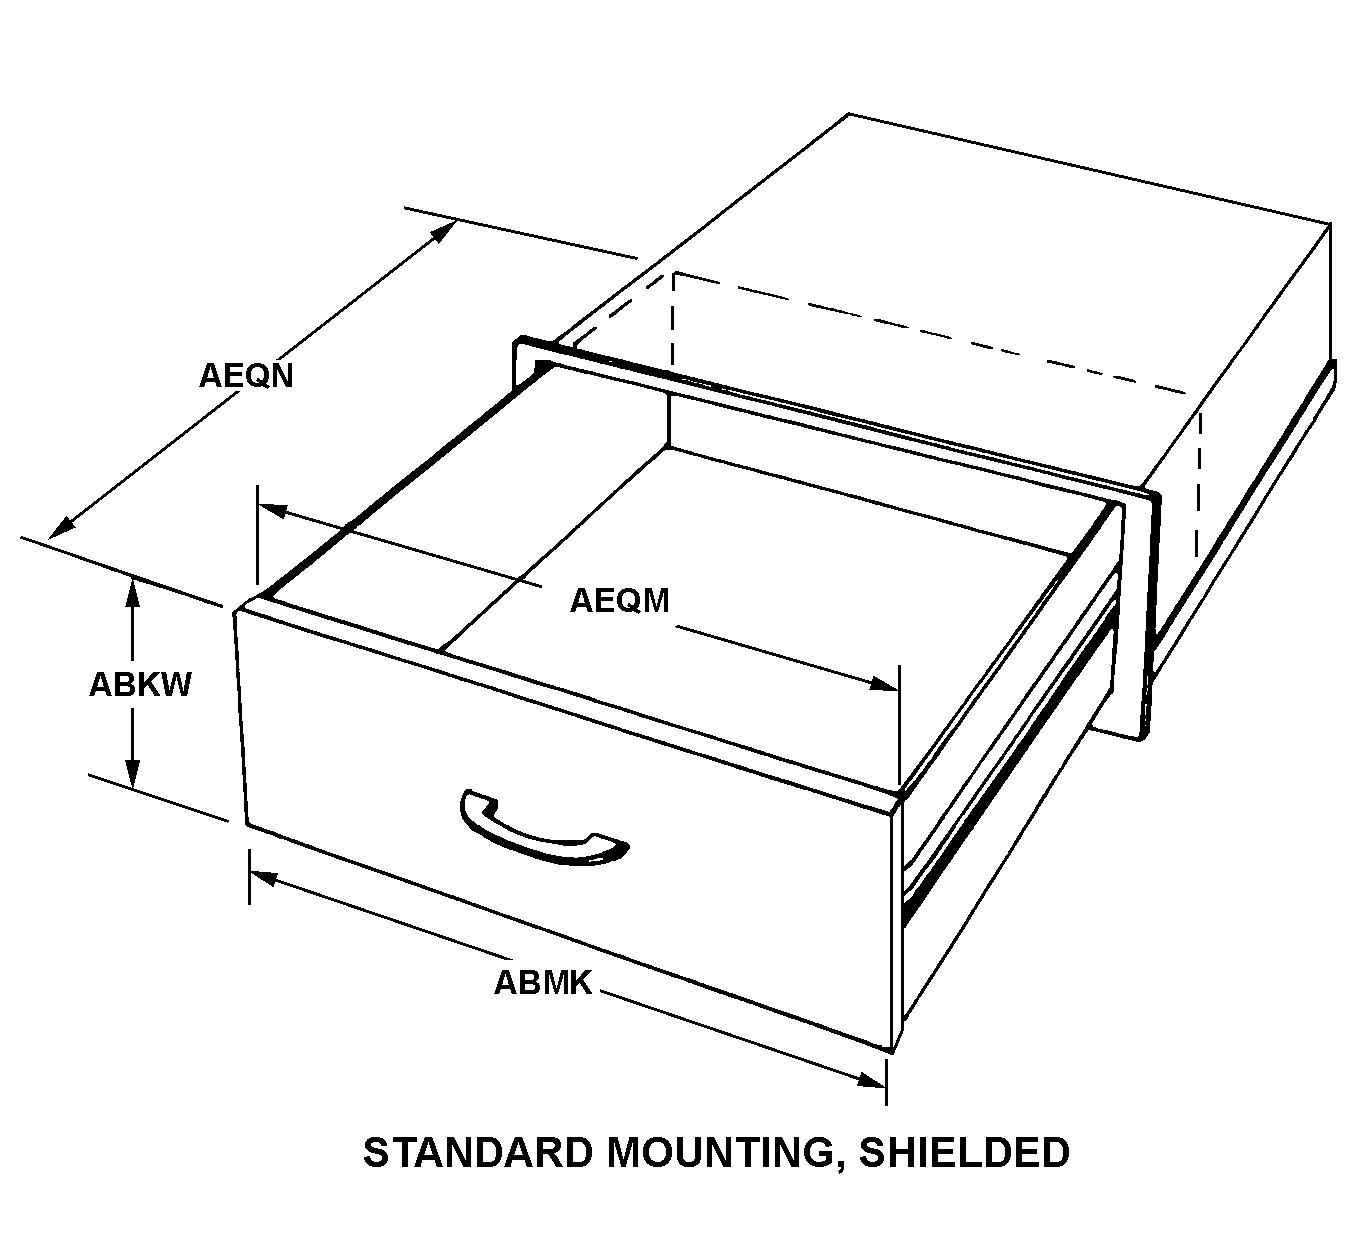 STANDARD MOUNTING, SHIELDED style nsn 5975-01-004-1143